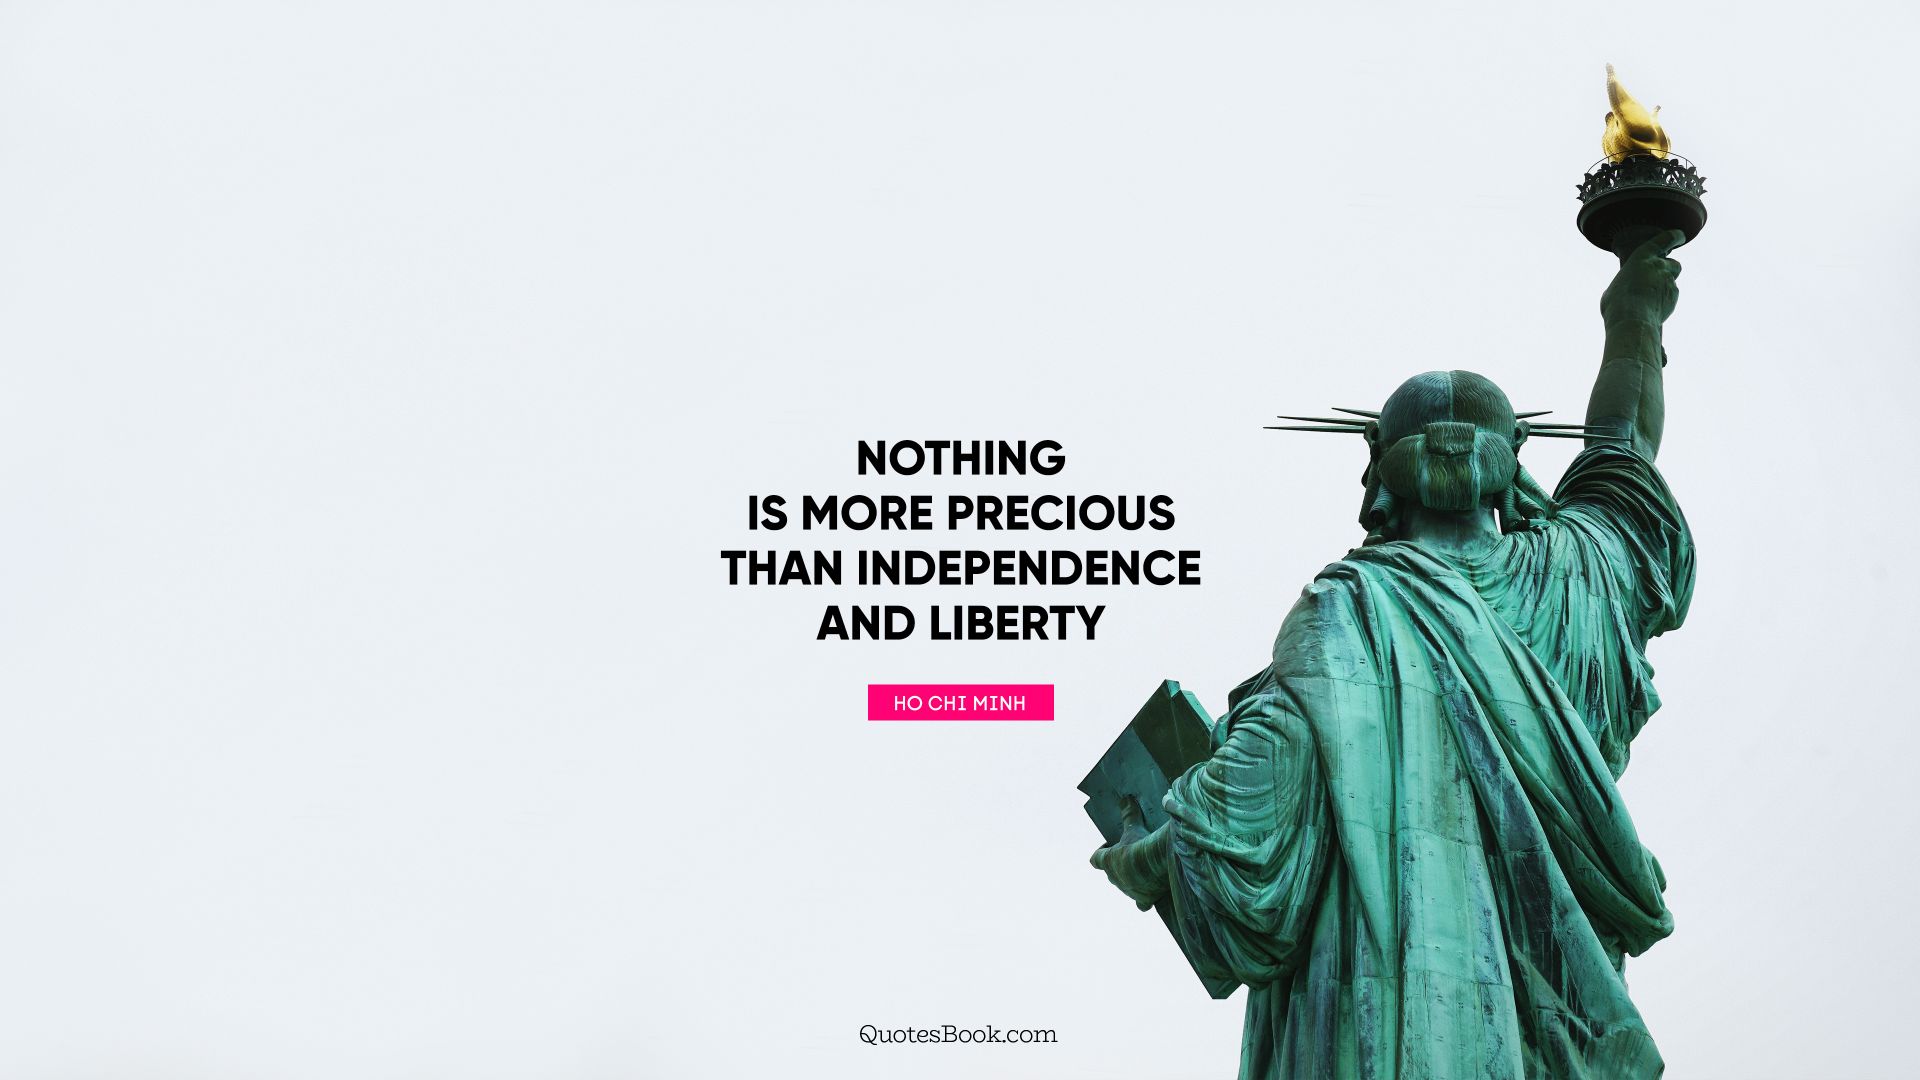 Nothing is more precious than independence and liberty. - Quote by Ho Chi Minh